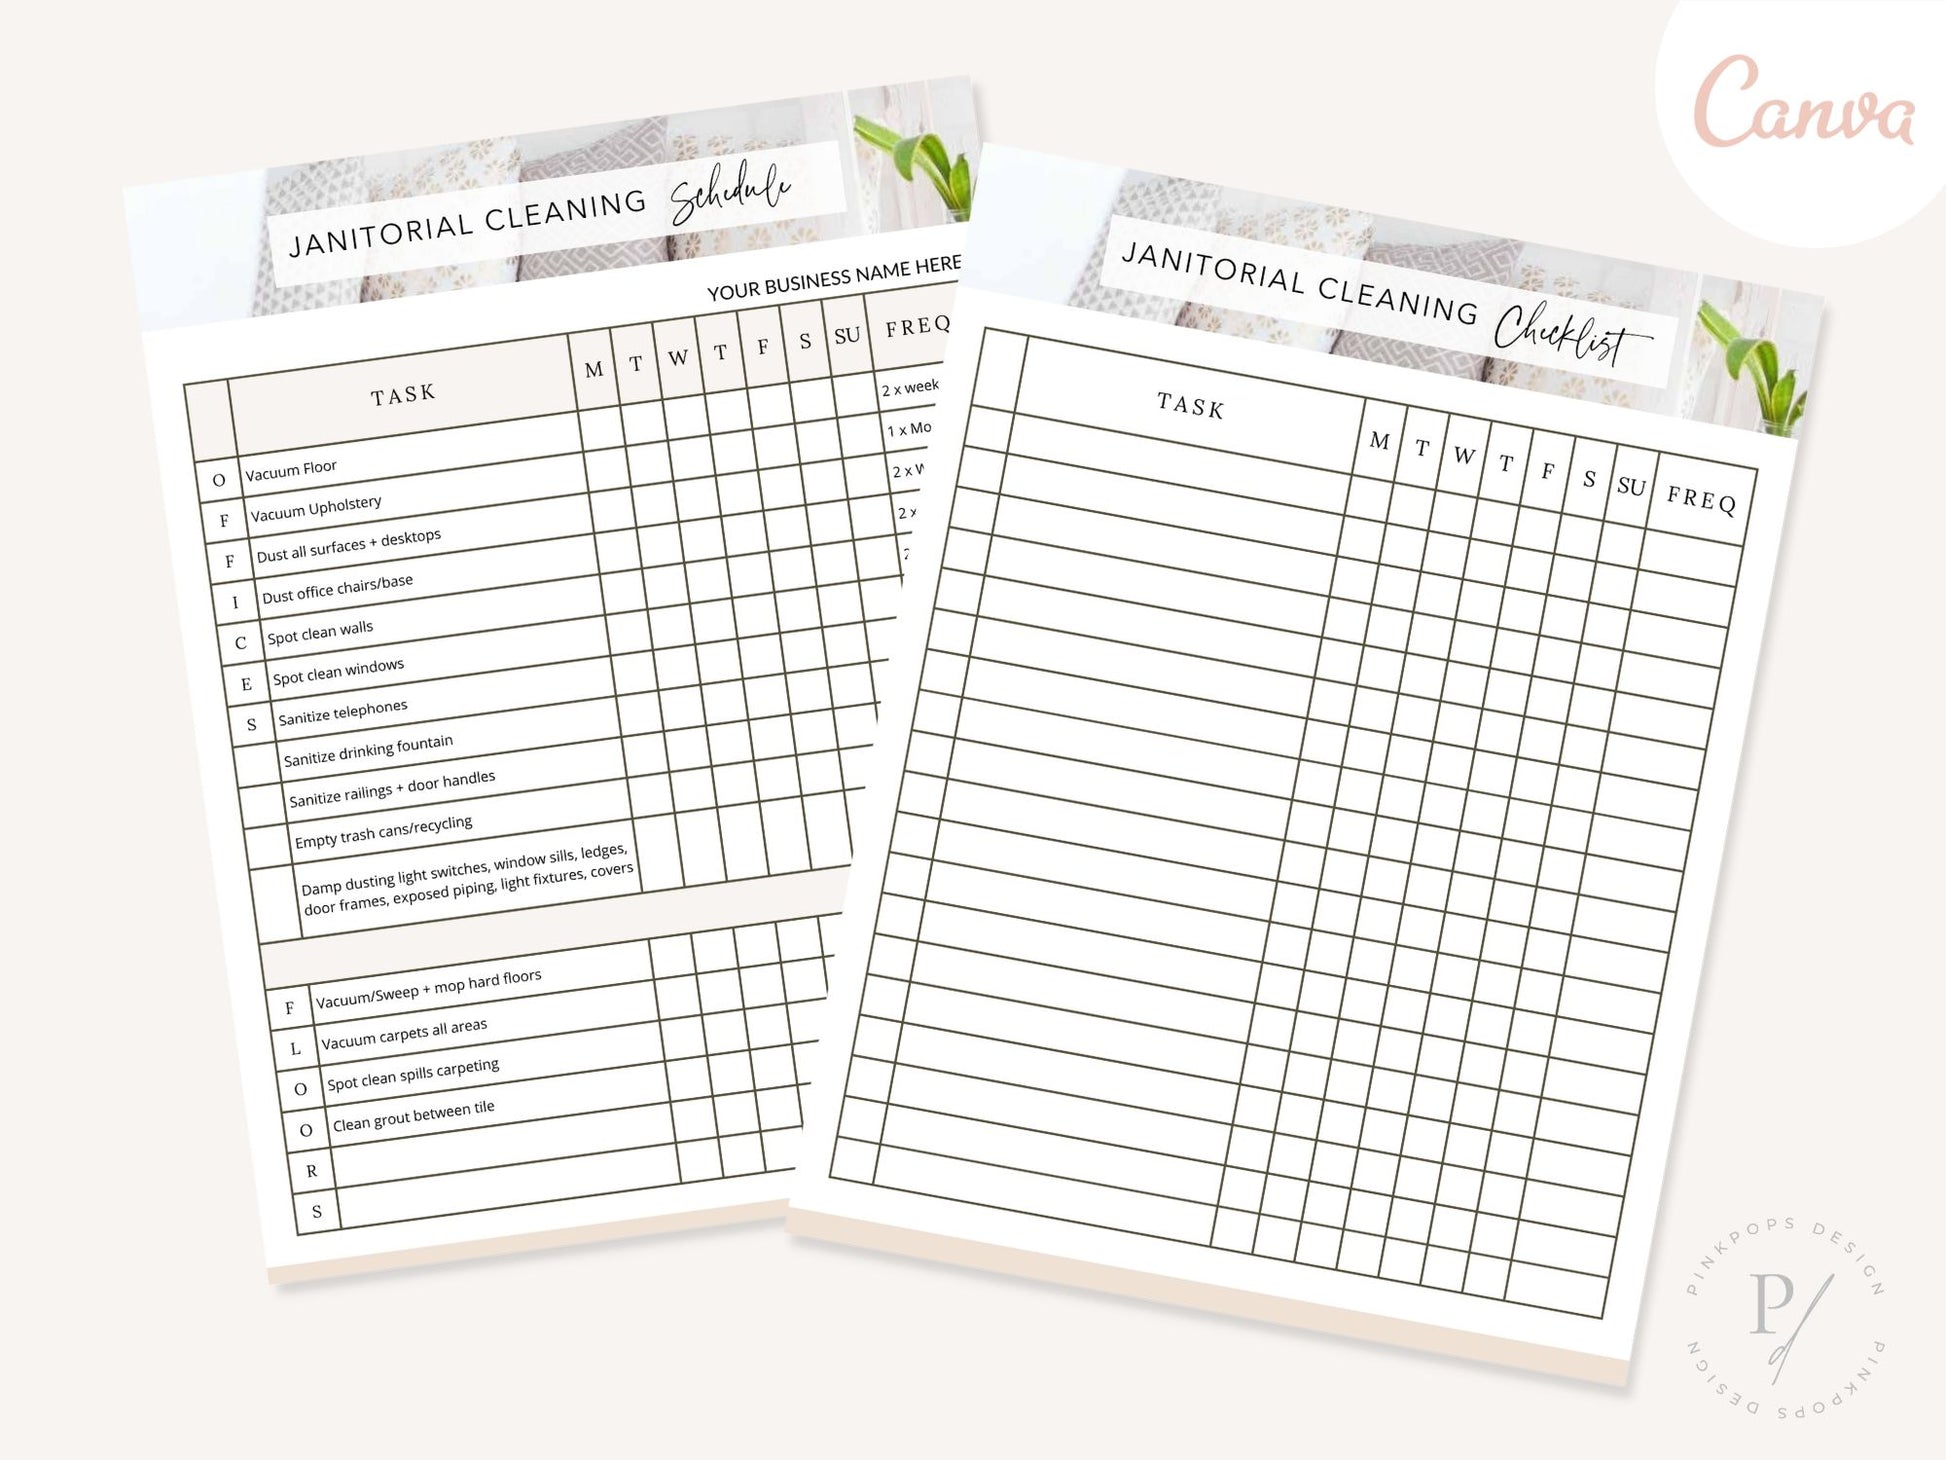 Janitorial Cleaning Schedule - Editable template for ensuring a systematic and organized approach to cleaning tasks, facilitating efficiency and professionalism in janitorial operations.